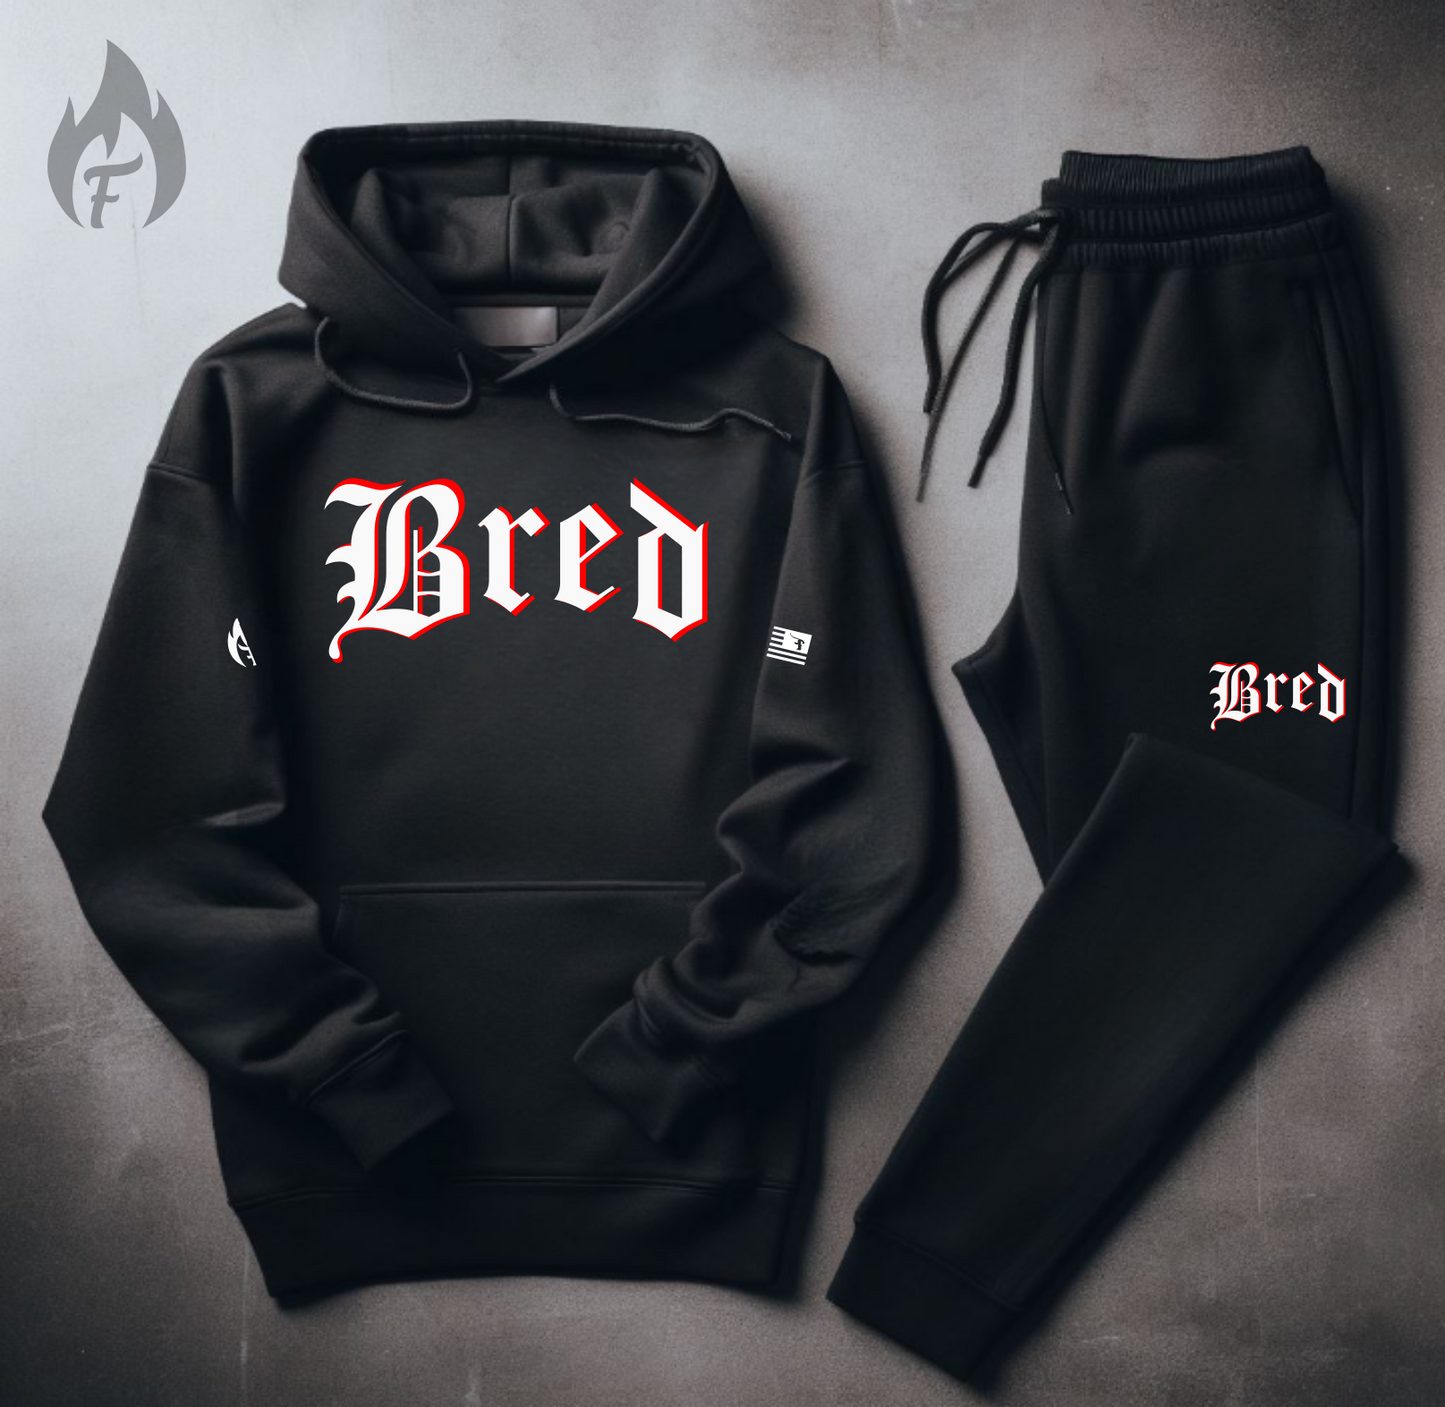 Men's BRED Sweatsuit To Match Air Jordan 4 Bred Re-Imagined Tracksuit Sneaker Hoodie and Joggers